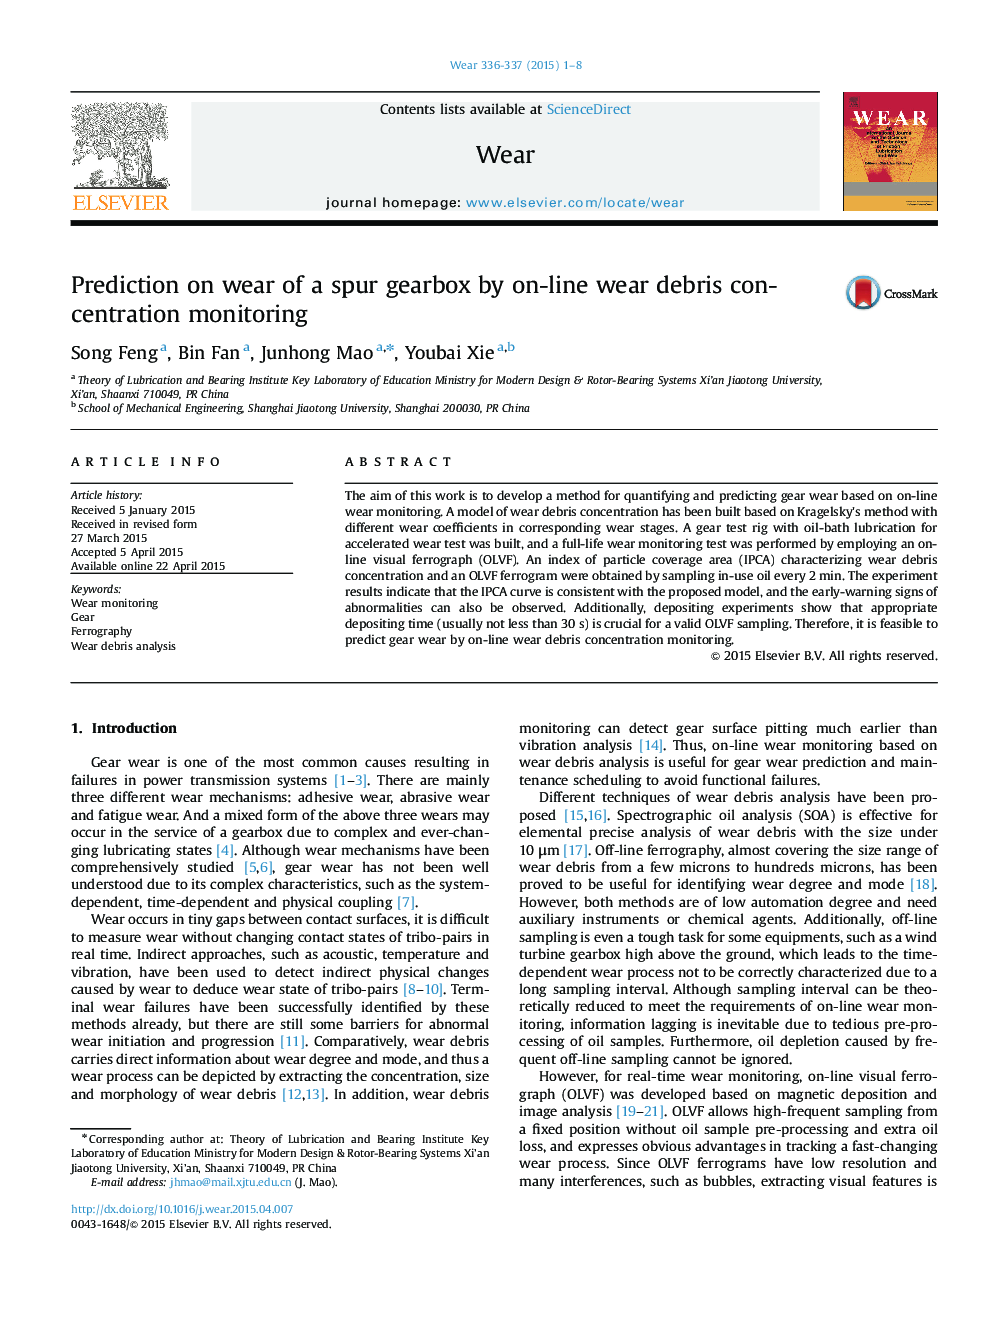 Prediction on wear of a spur gearbox by on-line wear debris concentration monitoring